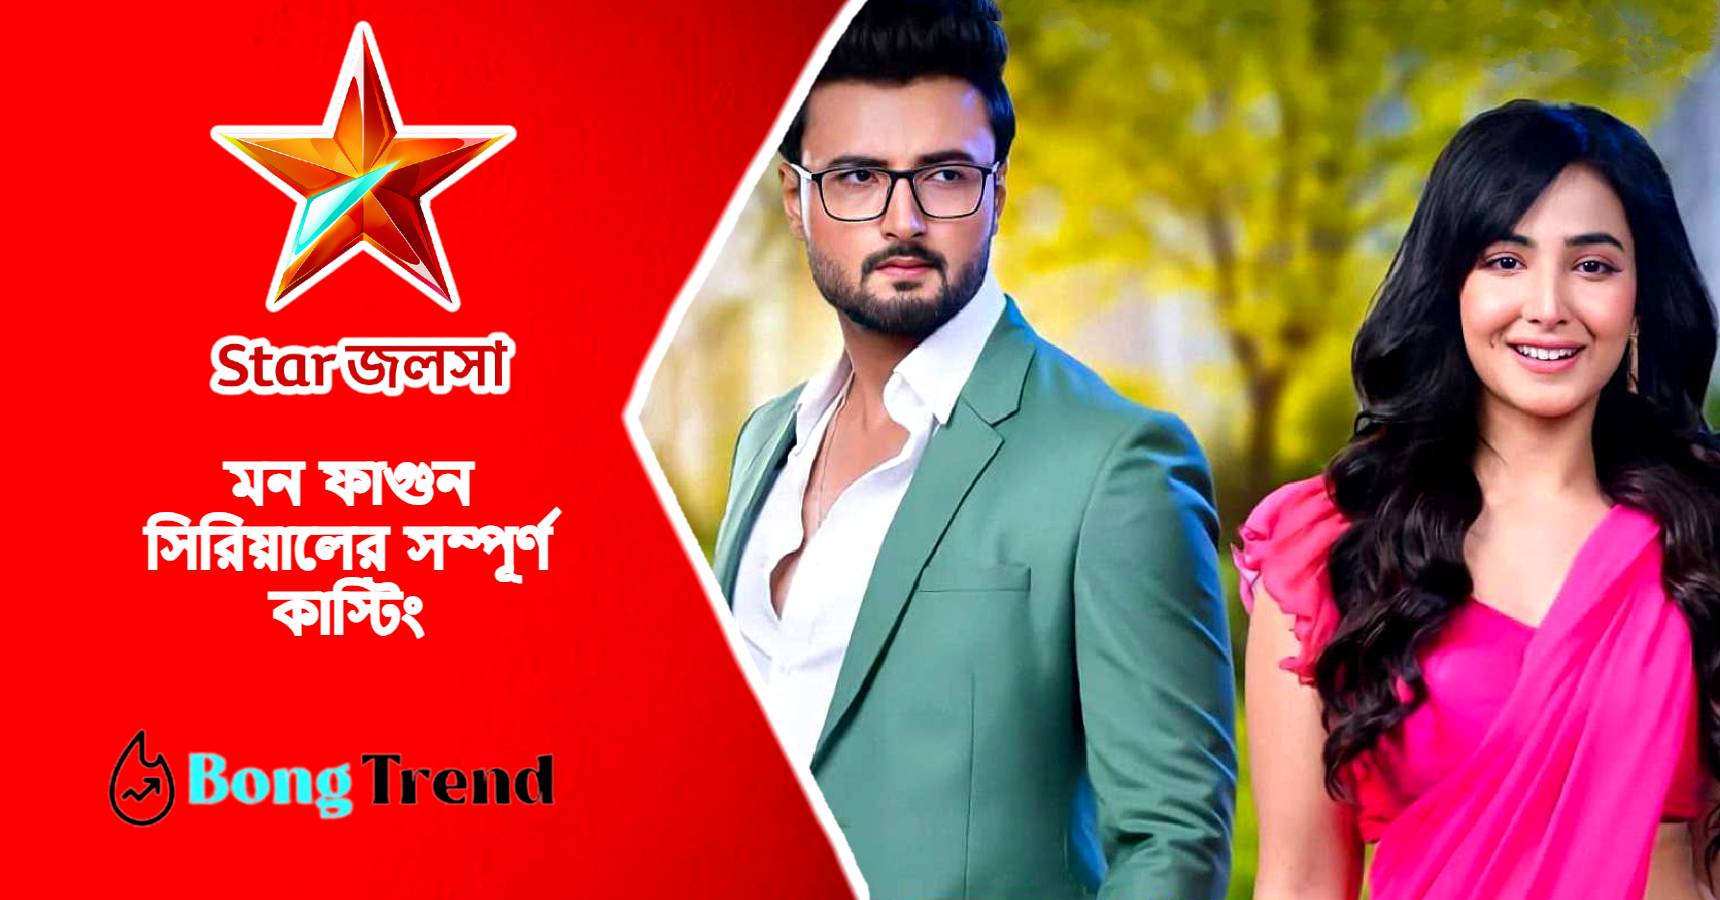 Star Jalsha Bengali serial Mon Phagun casting wiki with production house real names of actor actresses